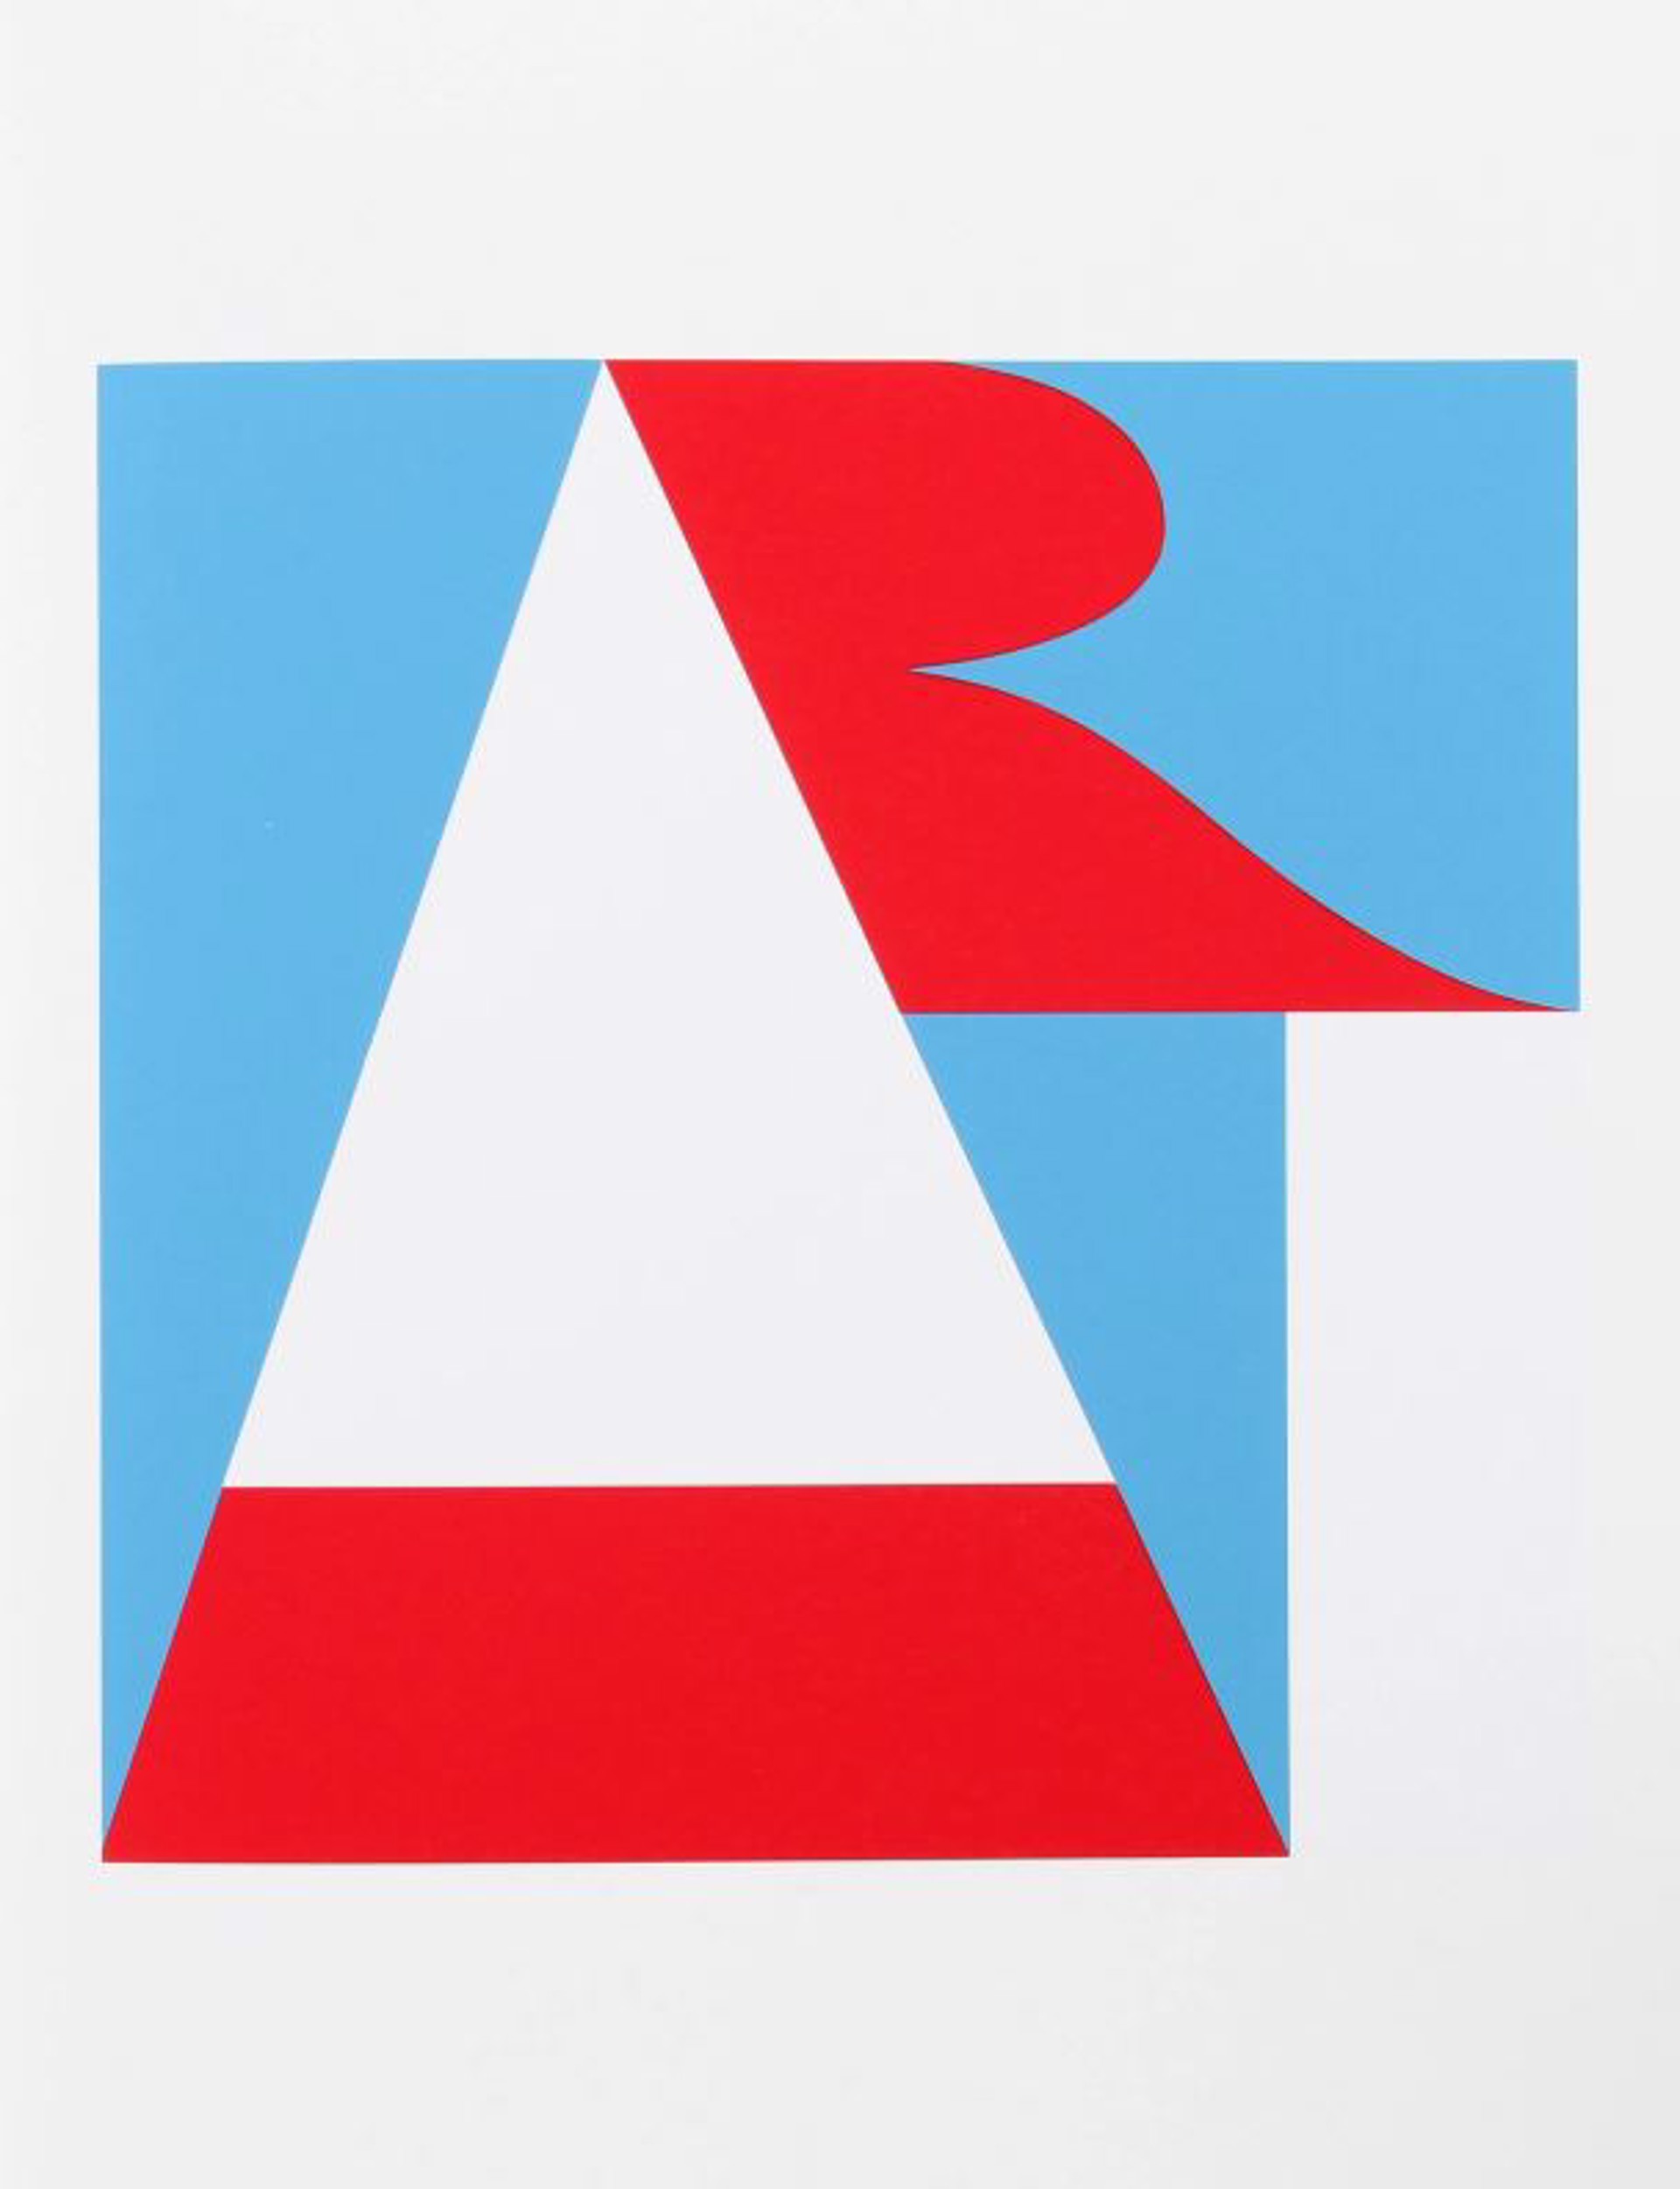 Art from The American Dream Portolio by Robert Indiana